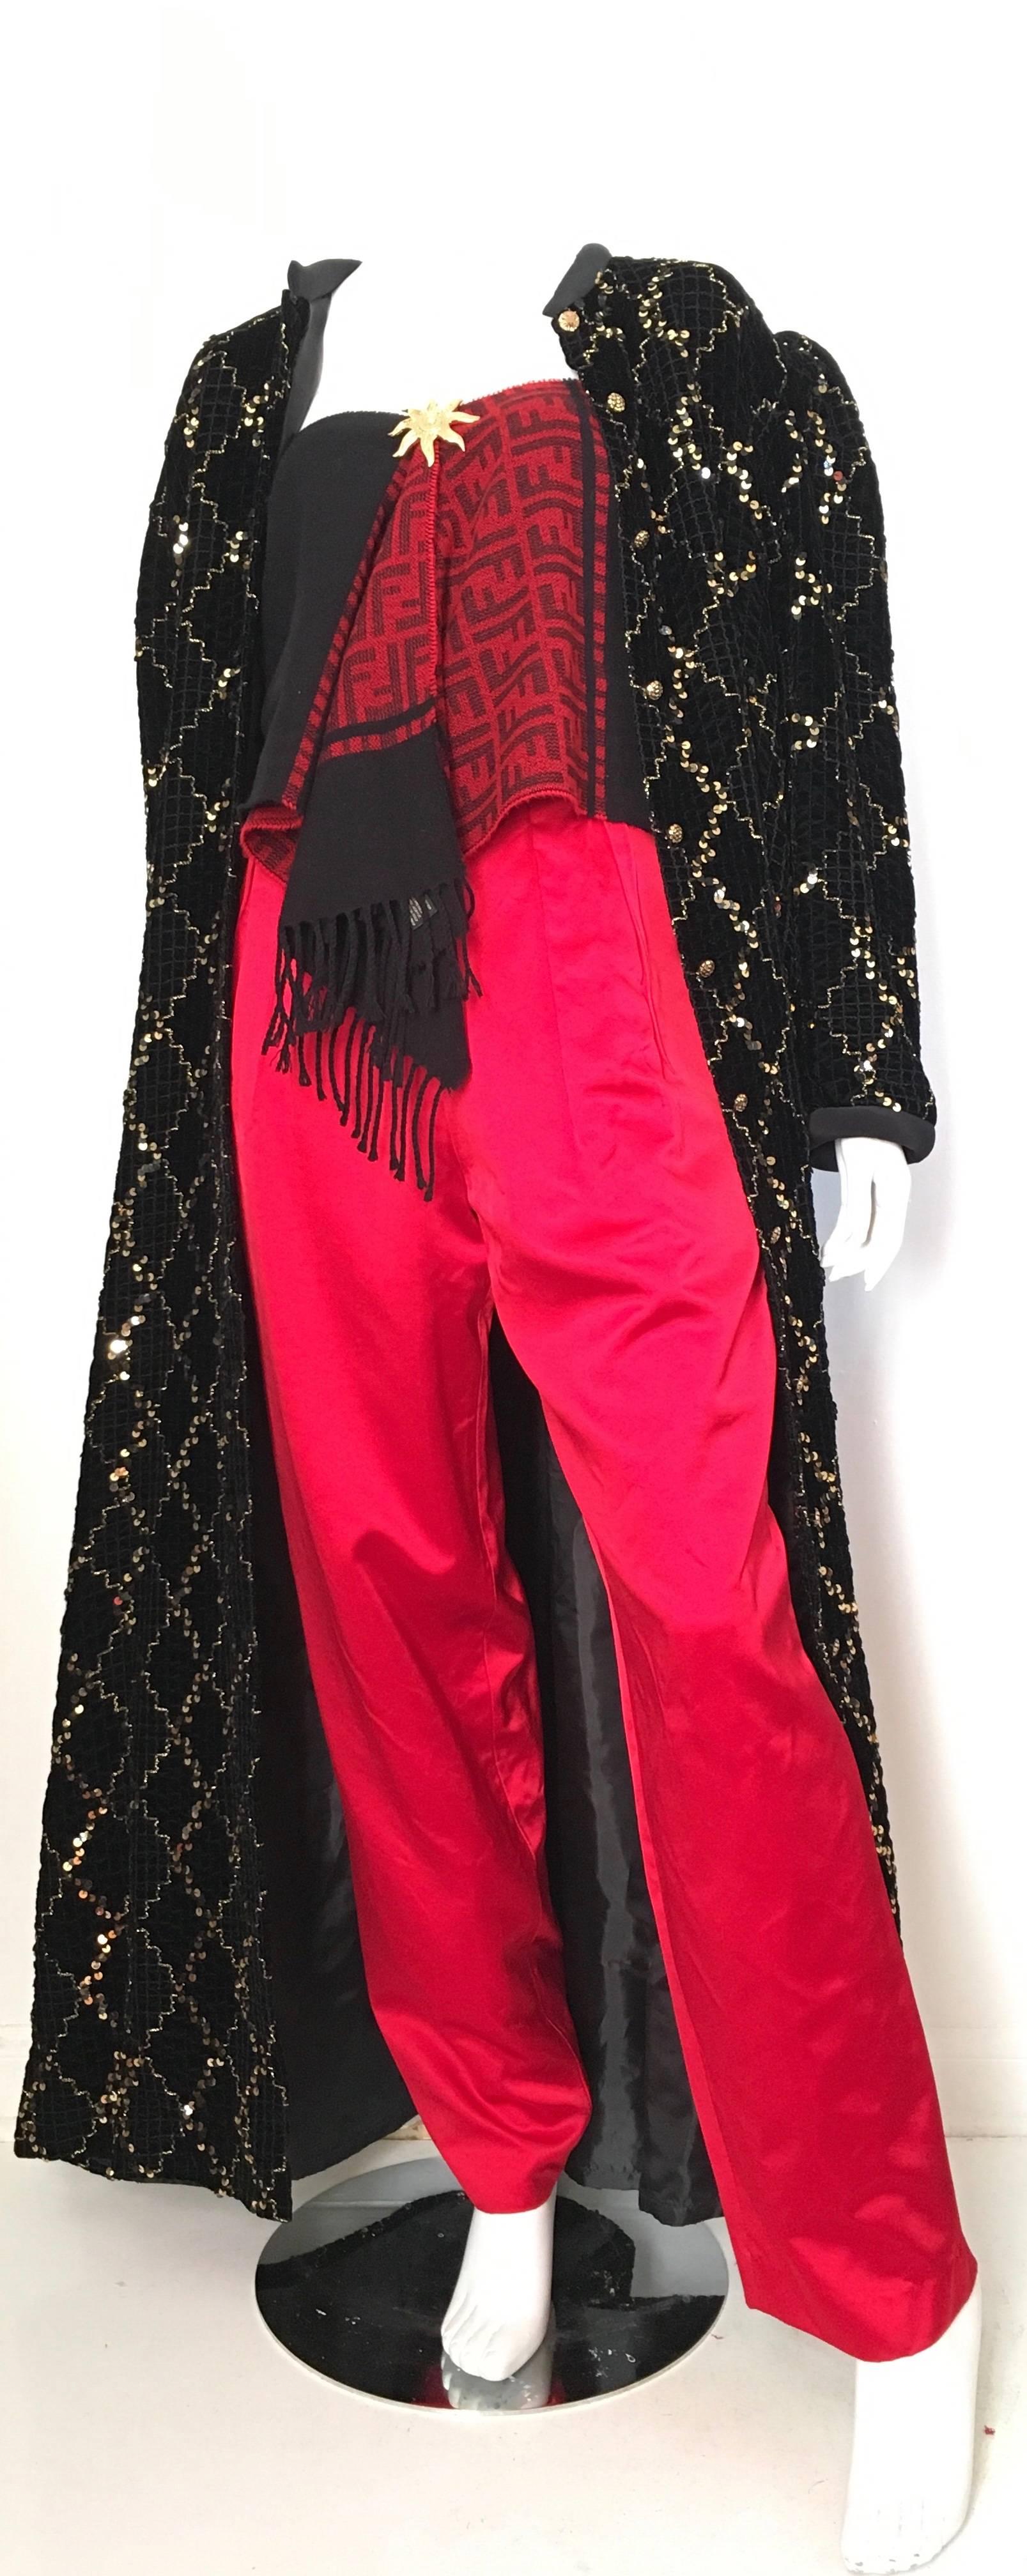 Bill Blass for Blassport red satin pleated evening pants with pockets is labeled a size 8 but fits like an USA 4.  Ladies please use your tape measure so you can properly measure your waist, hips and inseam to make certain these gorgeous Bill Blass